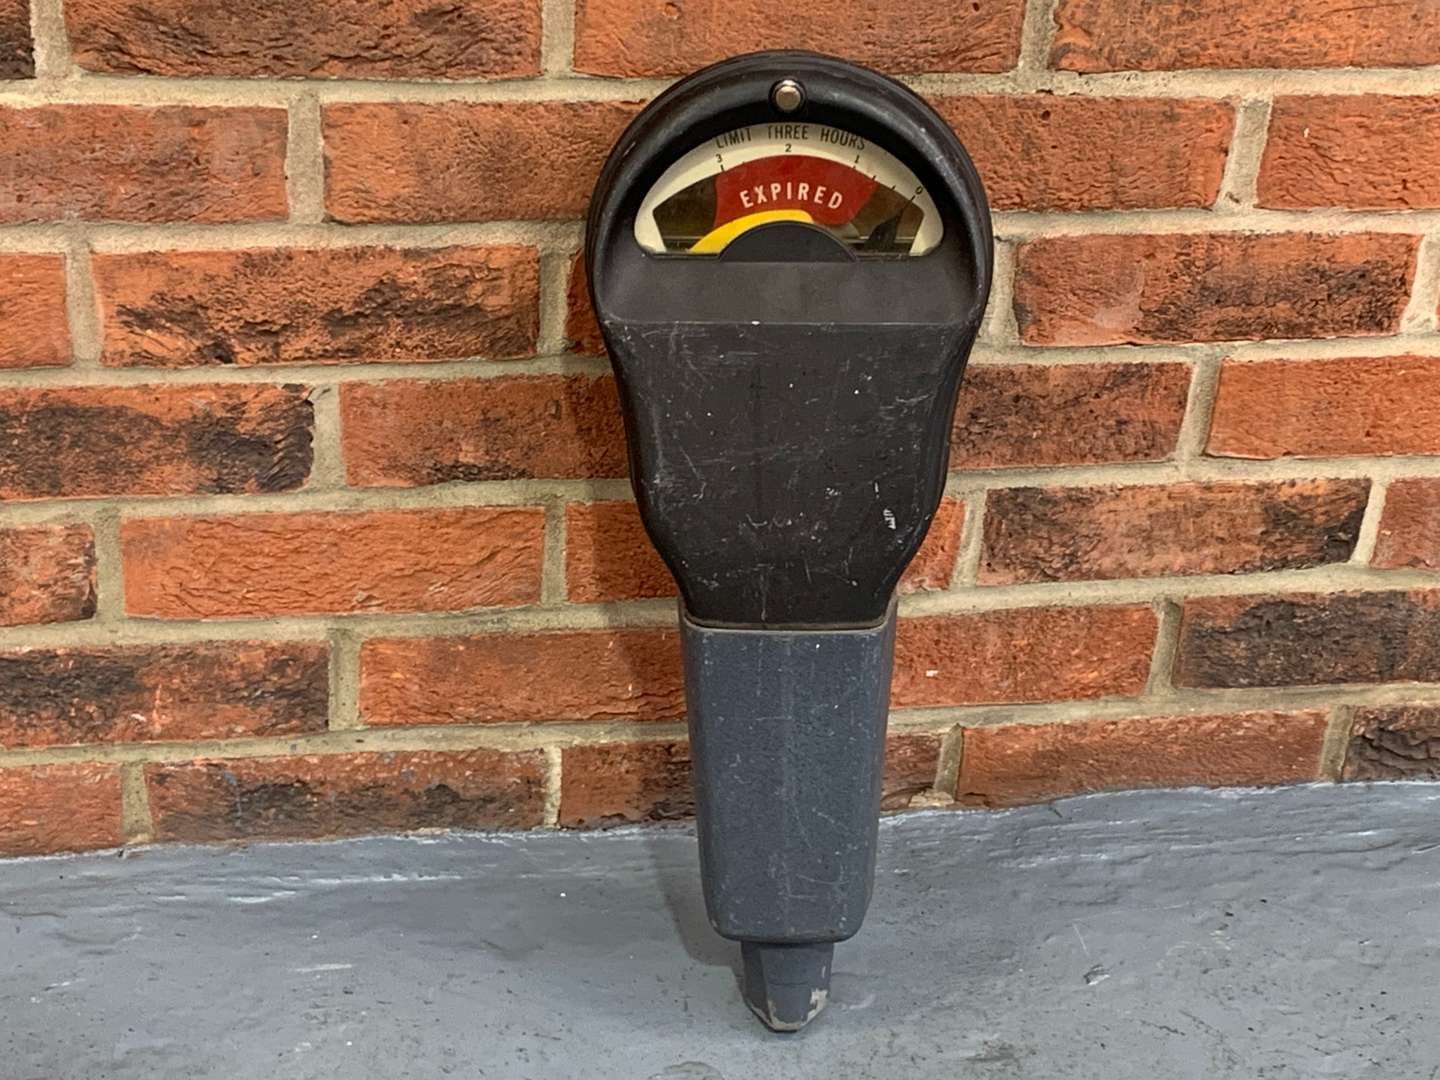 <p>American Coin Operated Parking Meter&nbsp;</p>